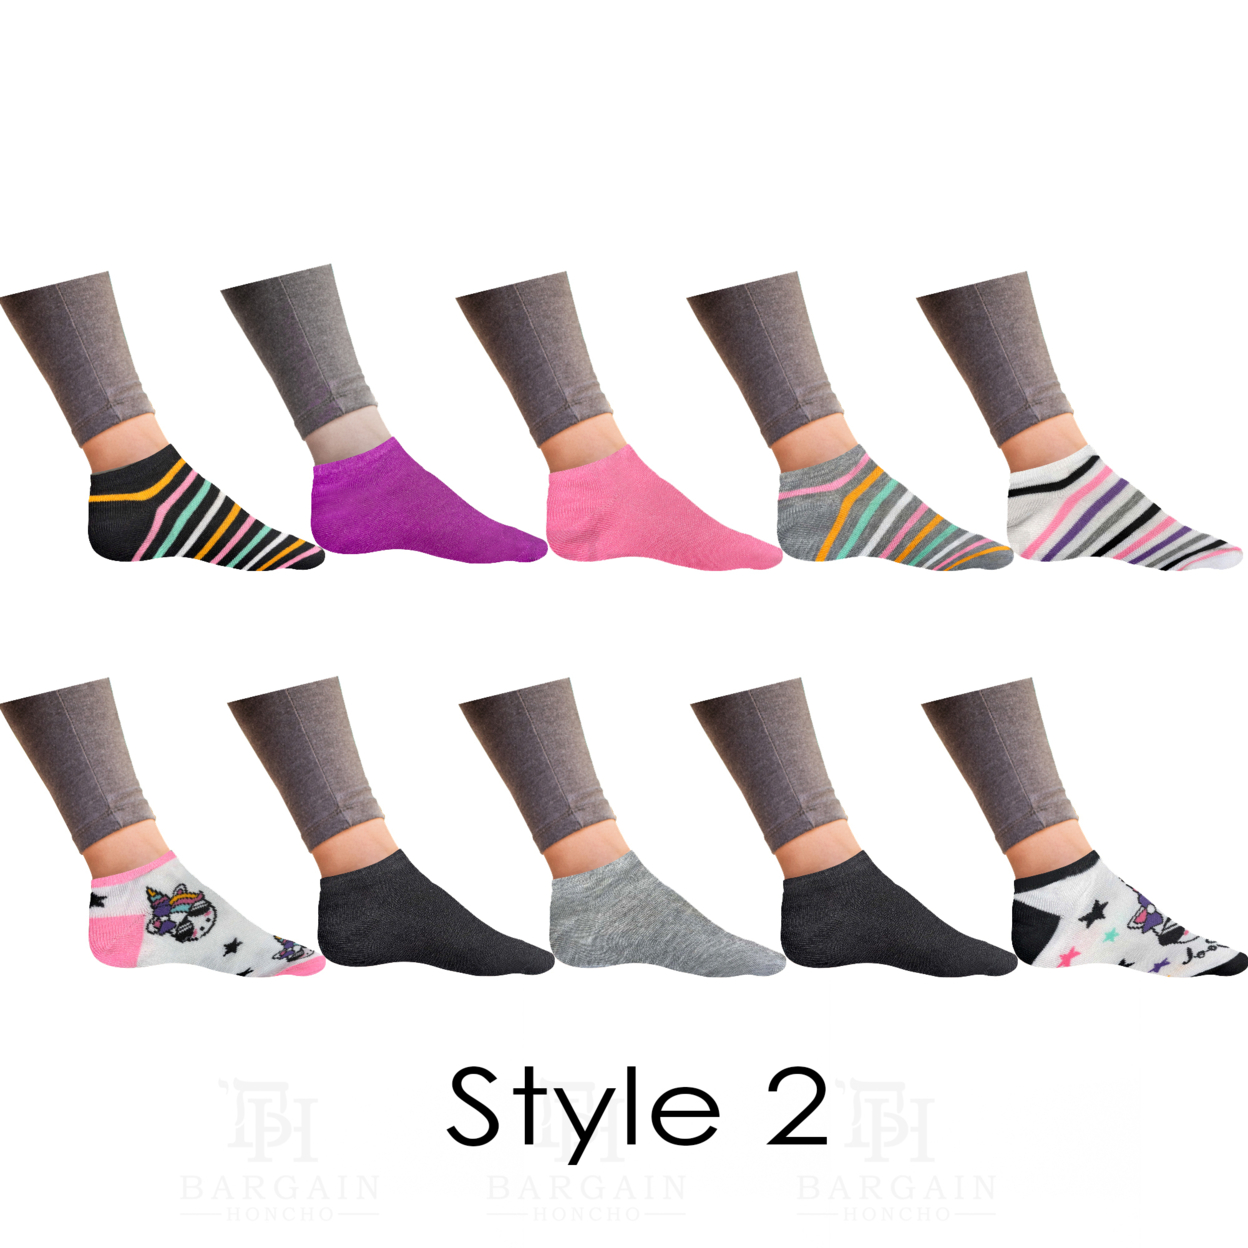 20-Pairs: Women’s Breathable Colorful Fun No Show Low Cut Ankle Socks - 4 & 5